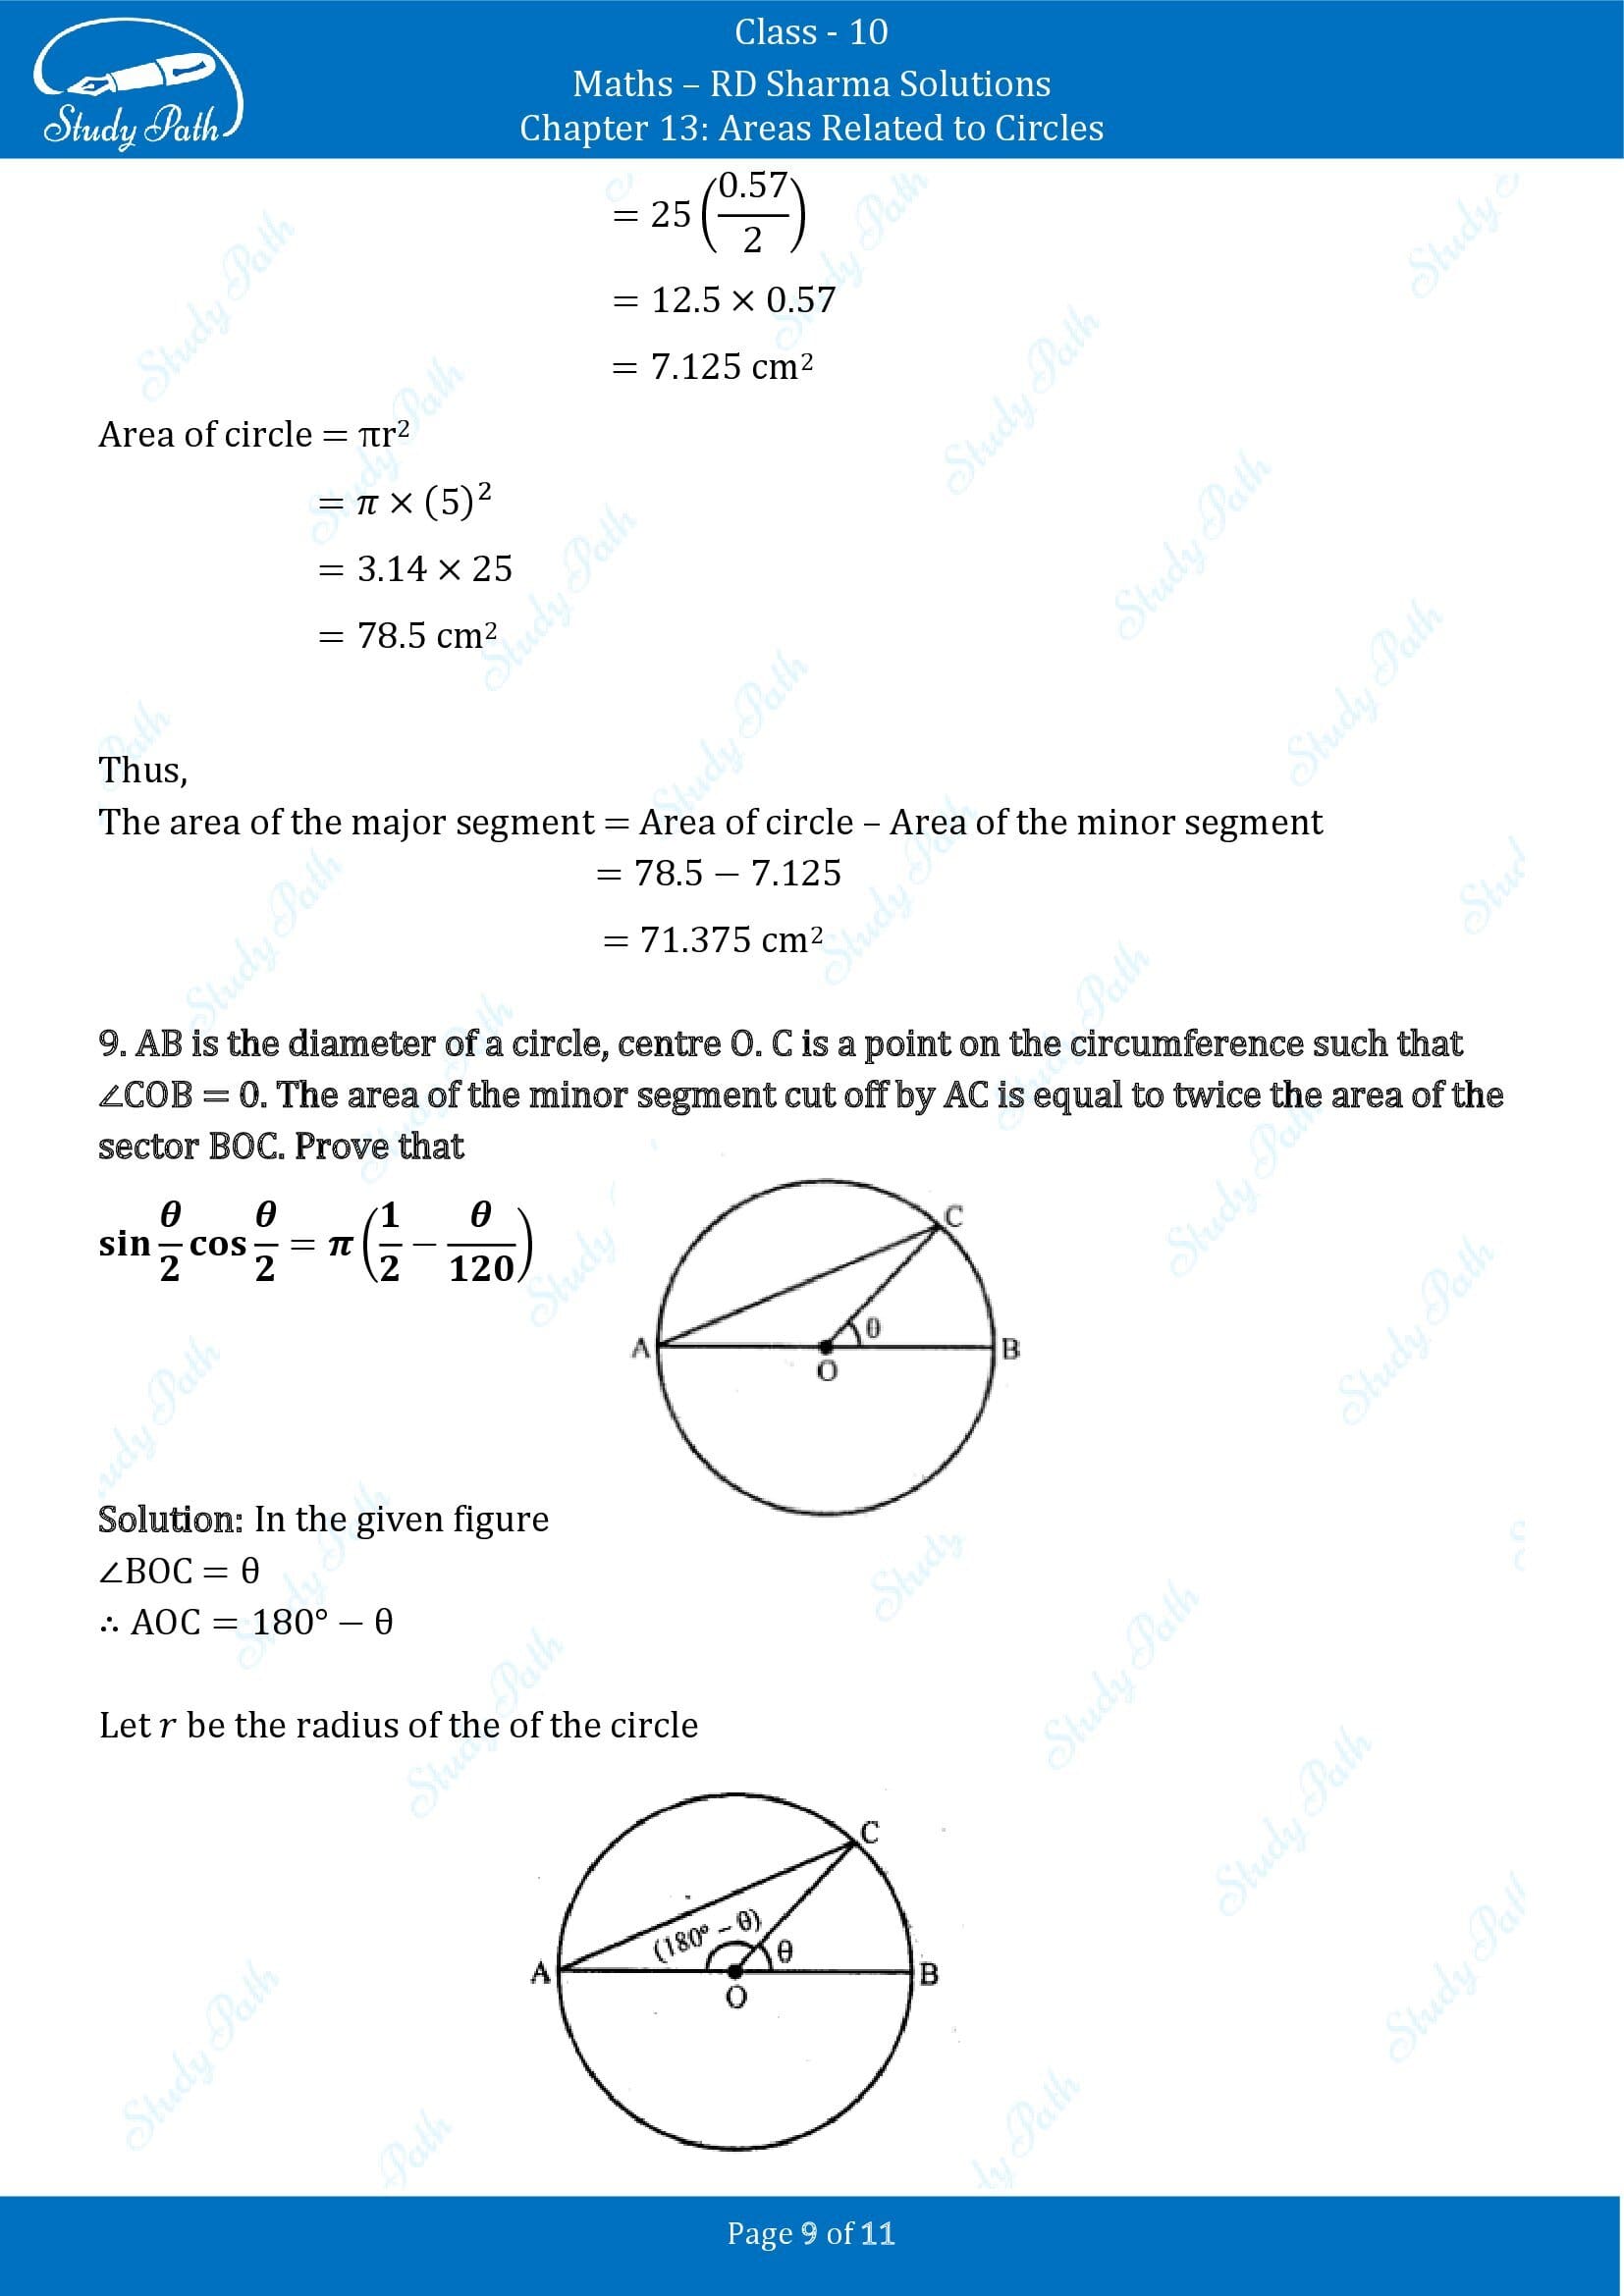 RD Sharma Solutions Class 10 Chapter 13 Areas Related to Circles Exercise 13.3 00009